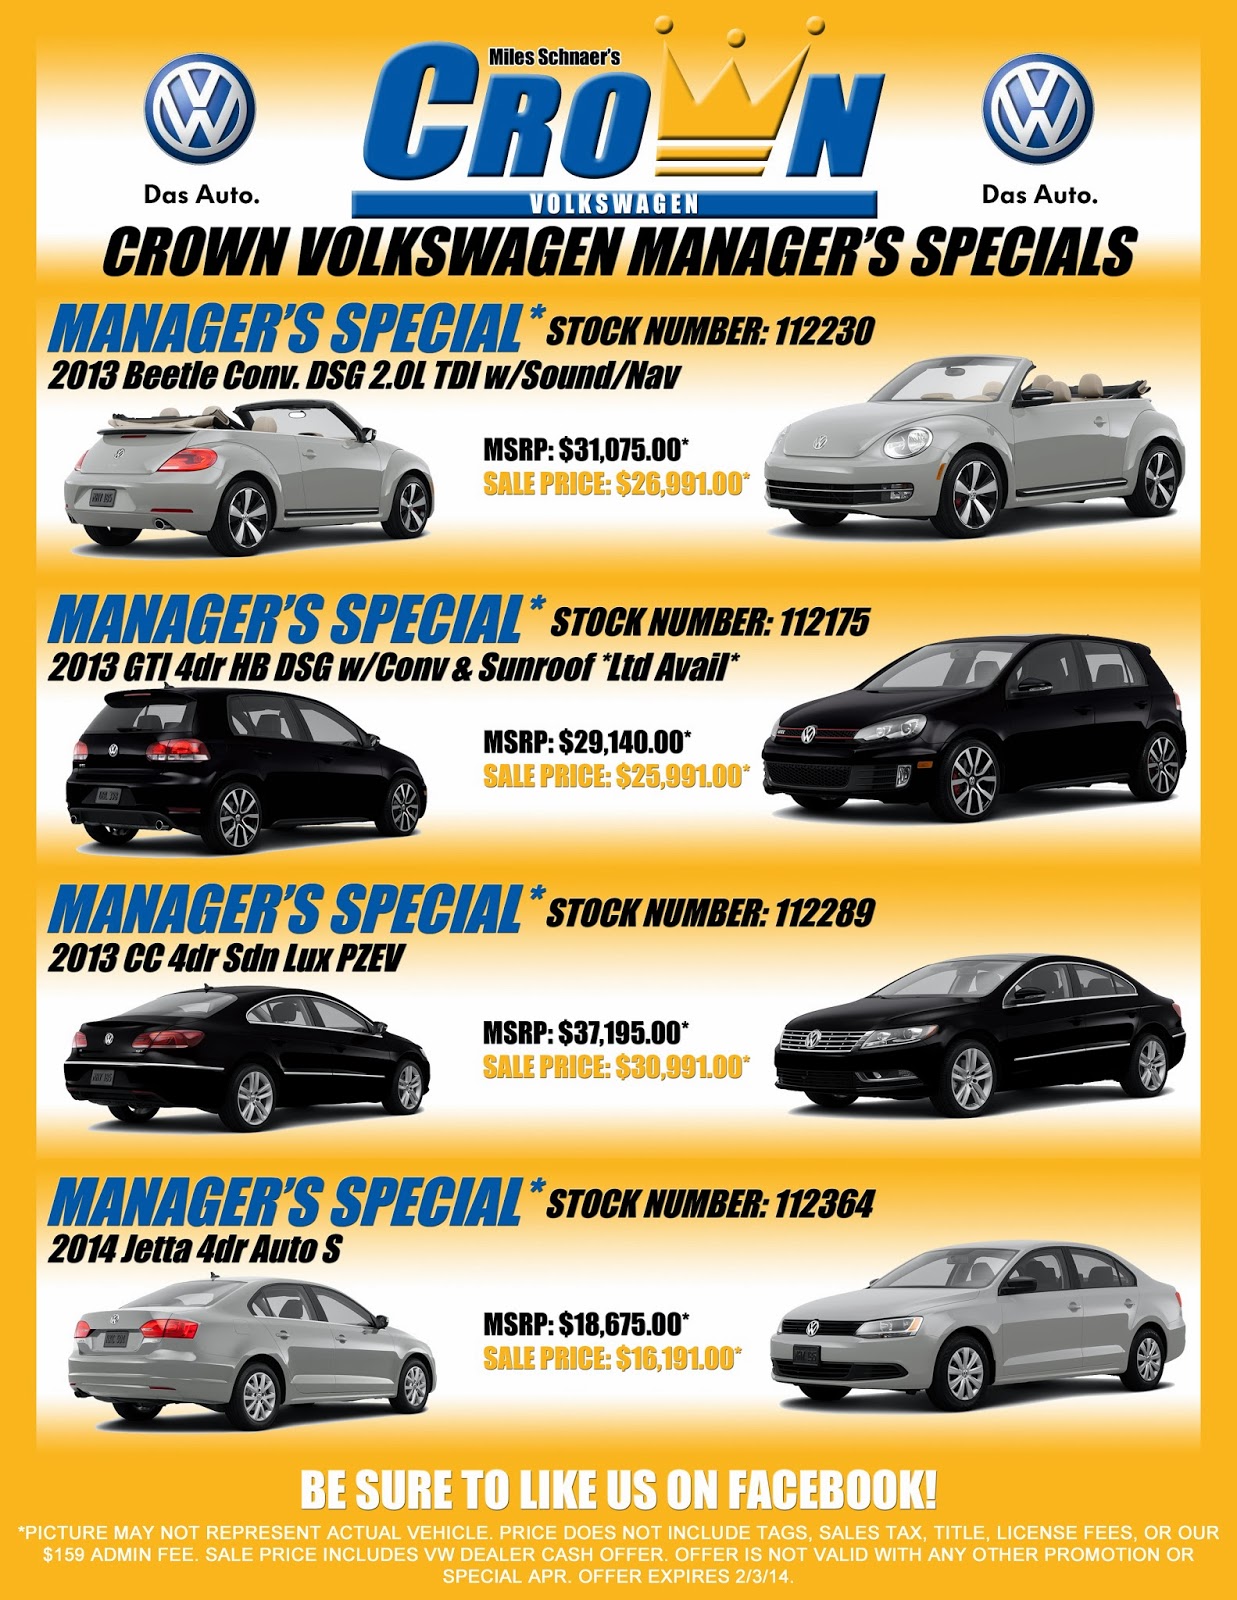 Click here to view Crown Volkswagen Manager's Specials